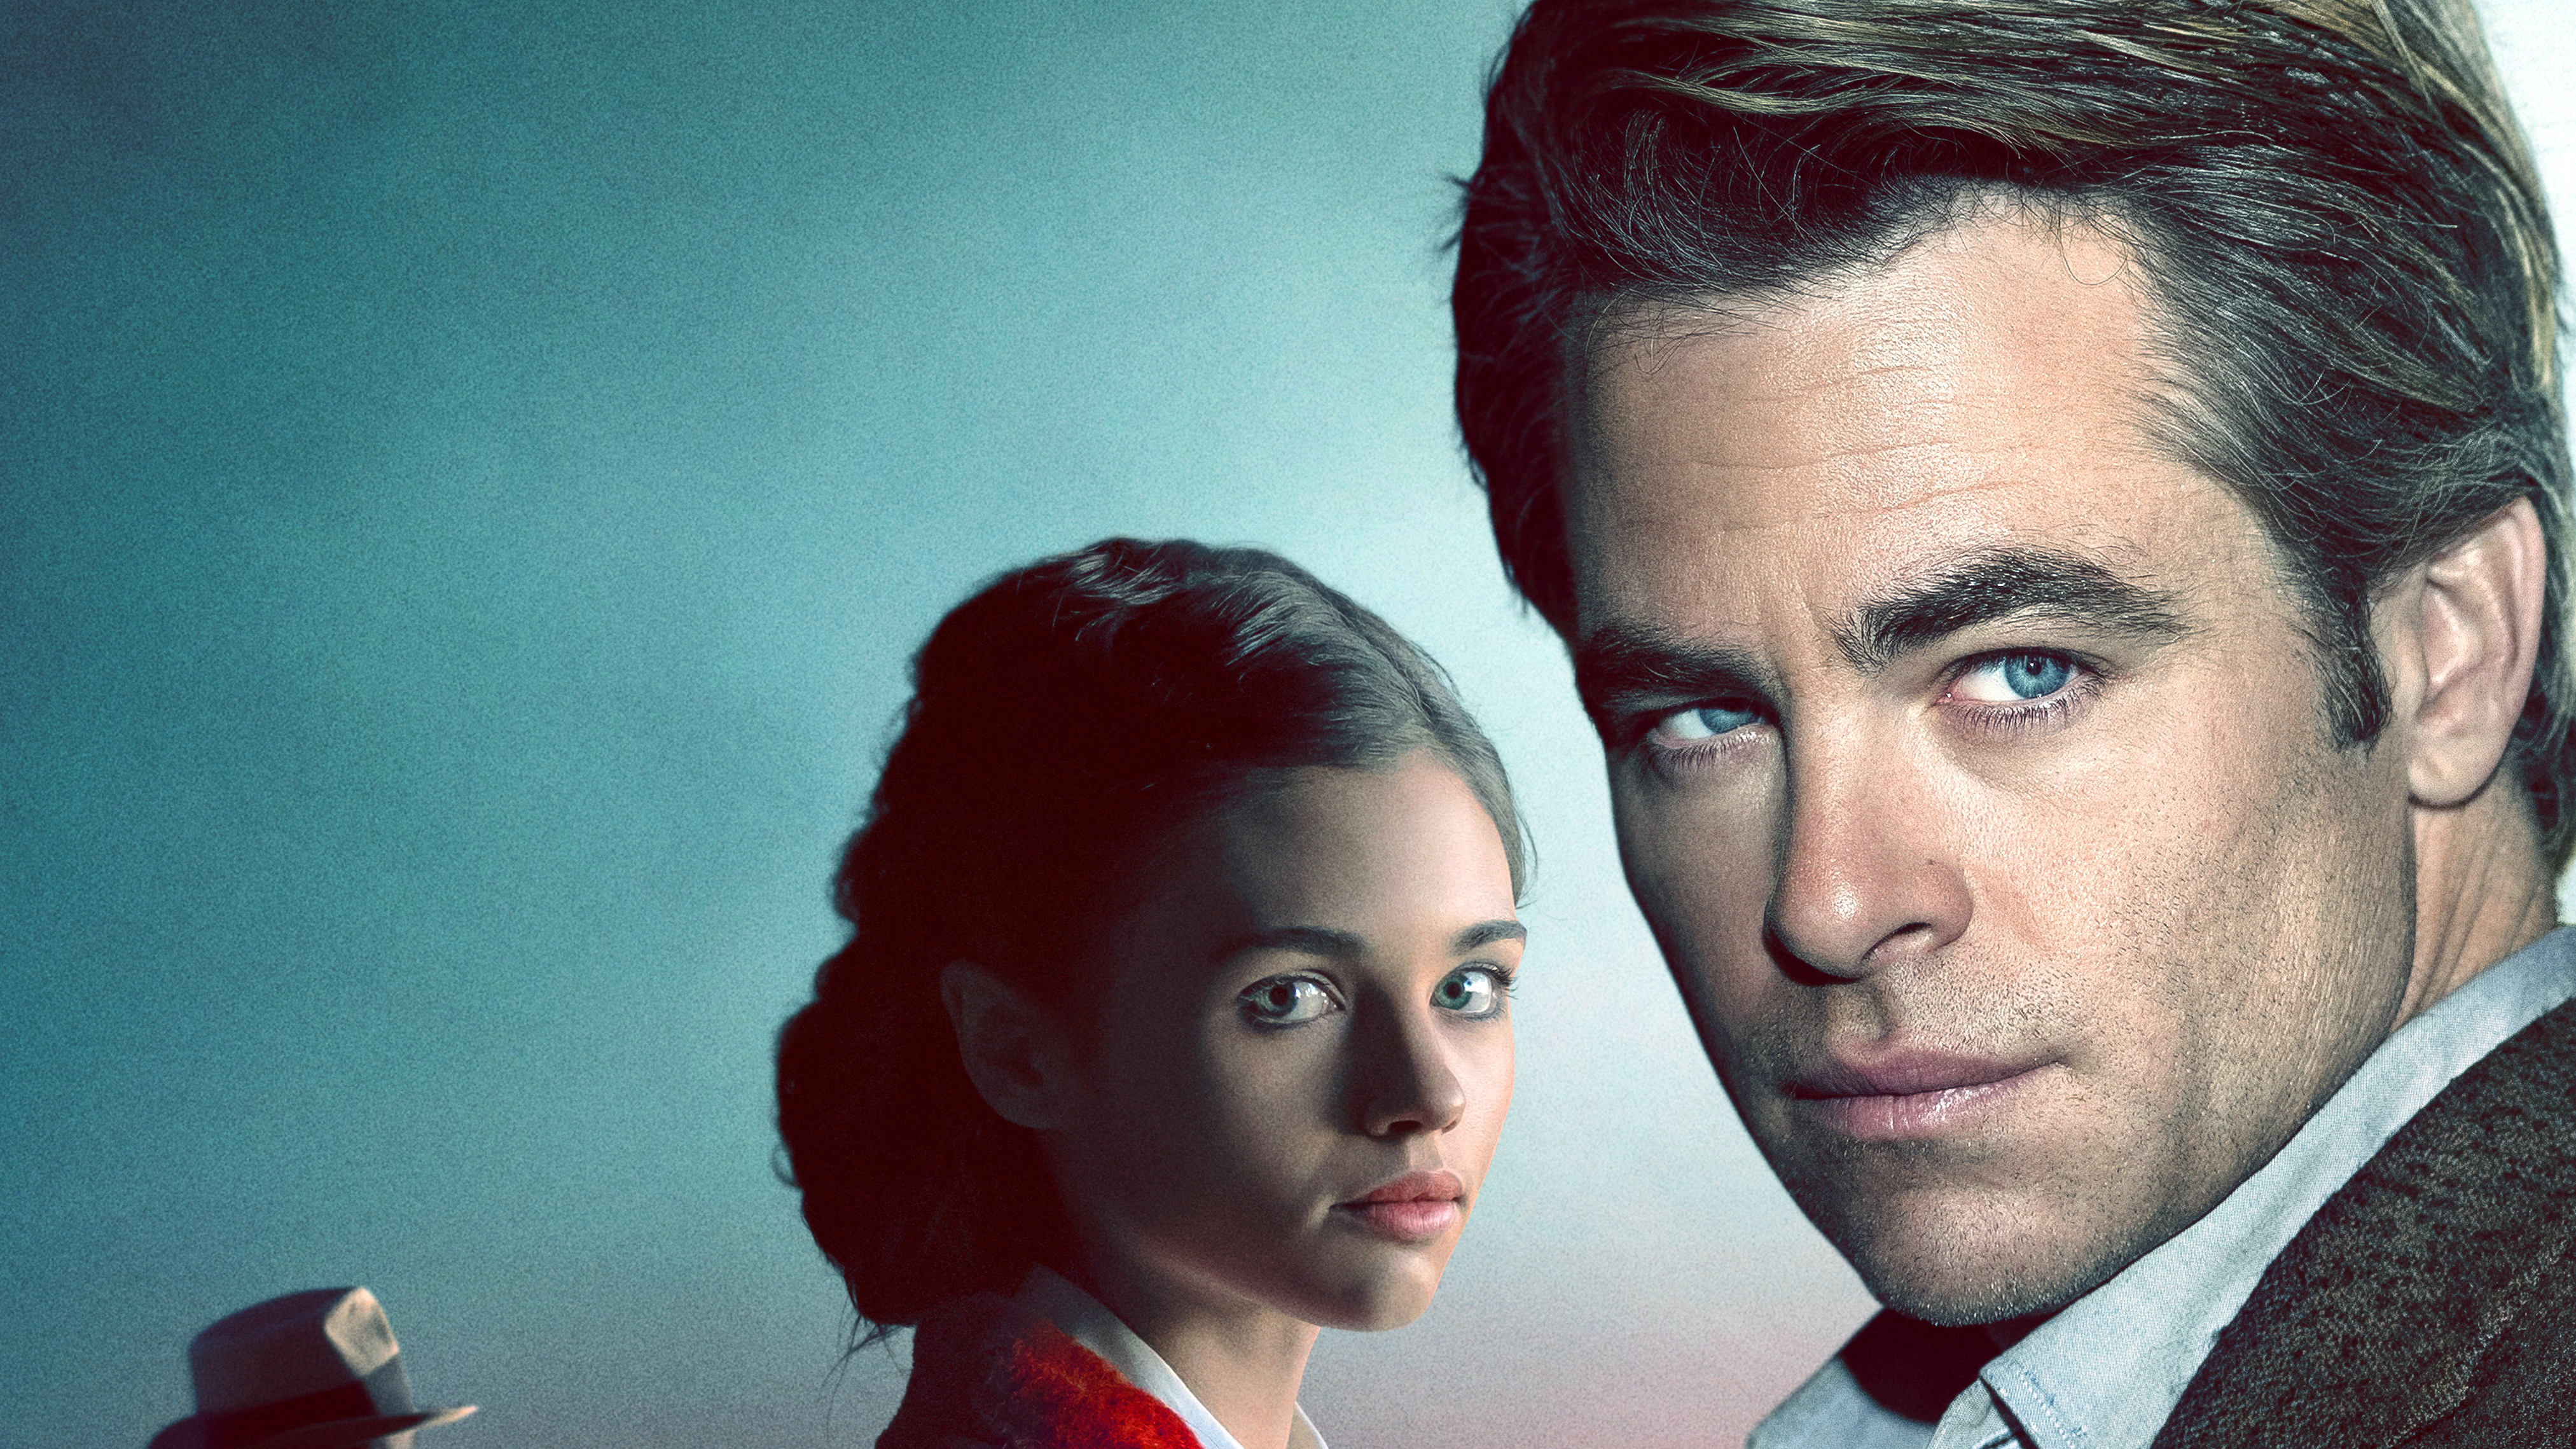 Wallpapers i am the night TV show Chris Pine on the desktop